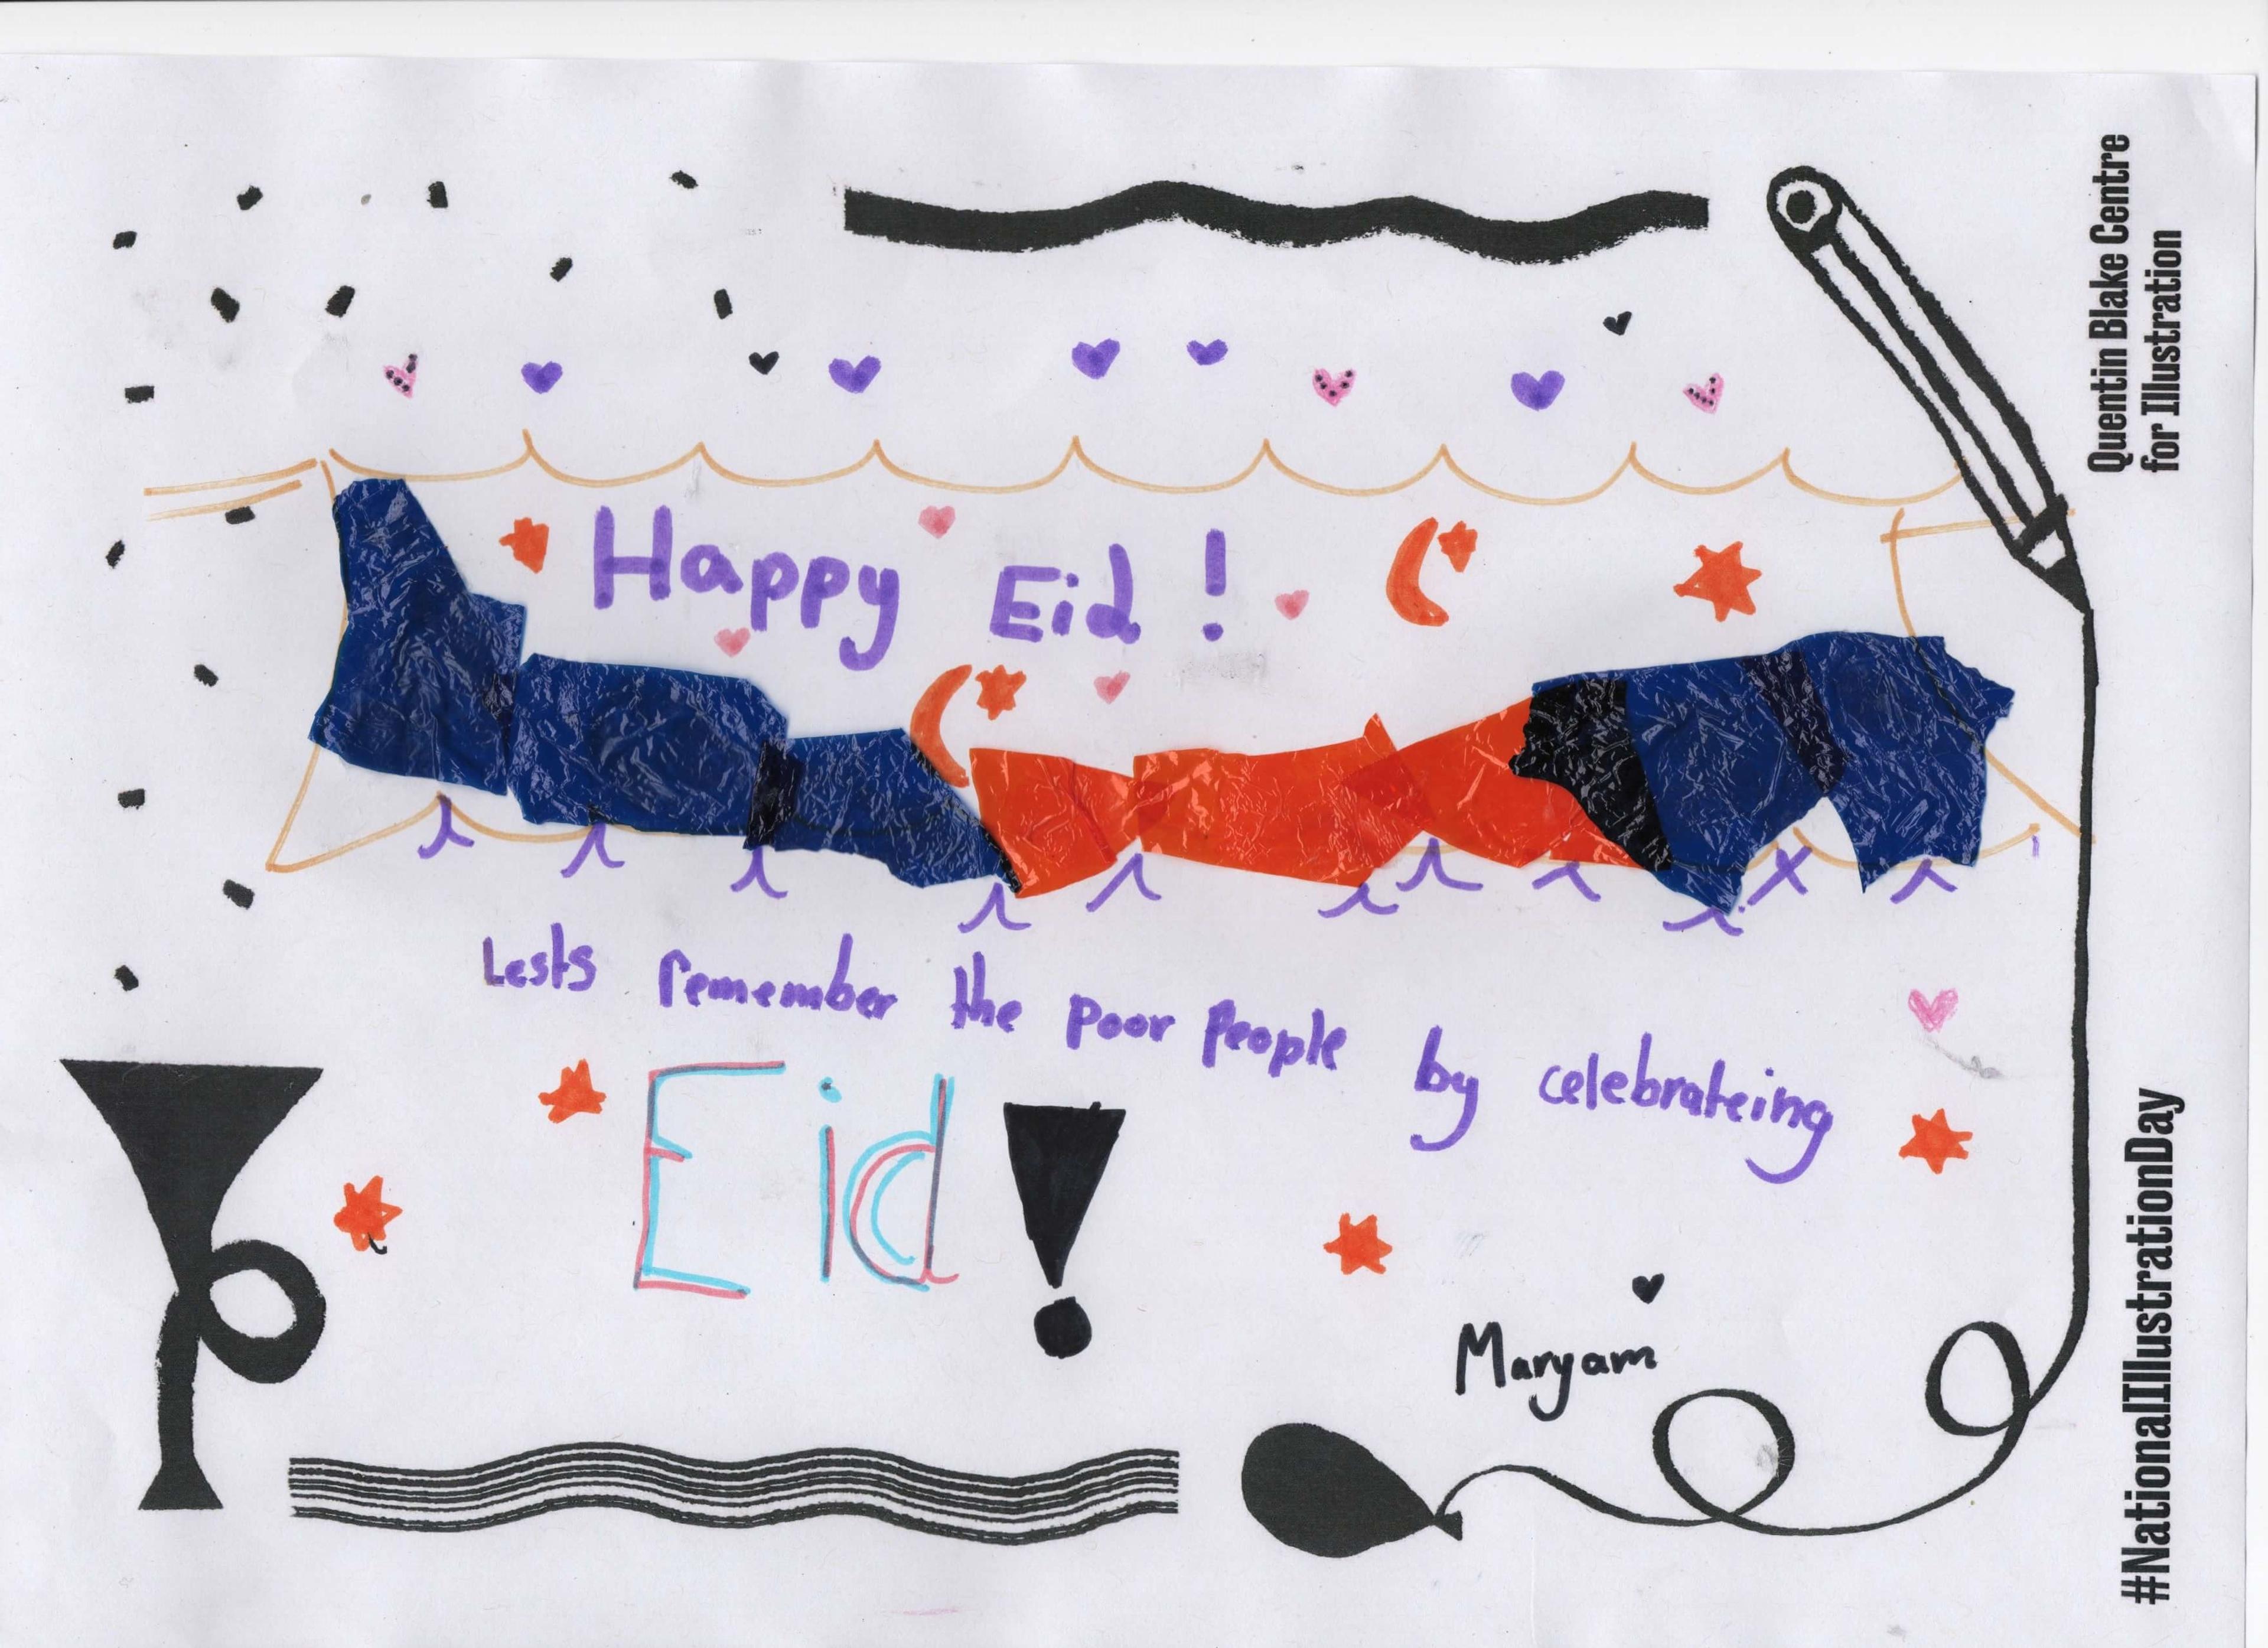 This picture reads: "Happy Eid! Let's remember the poor people by celebrating Eid!" The picture includes numerous hearts and stars and a strip of collaged cellophane paper, 